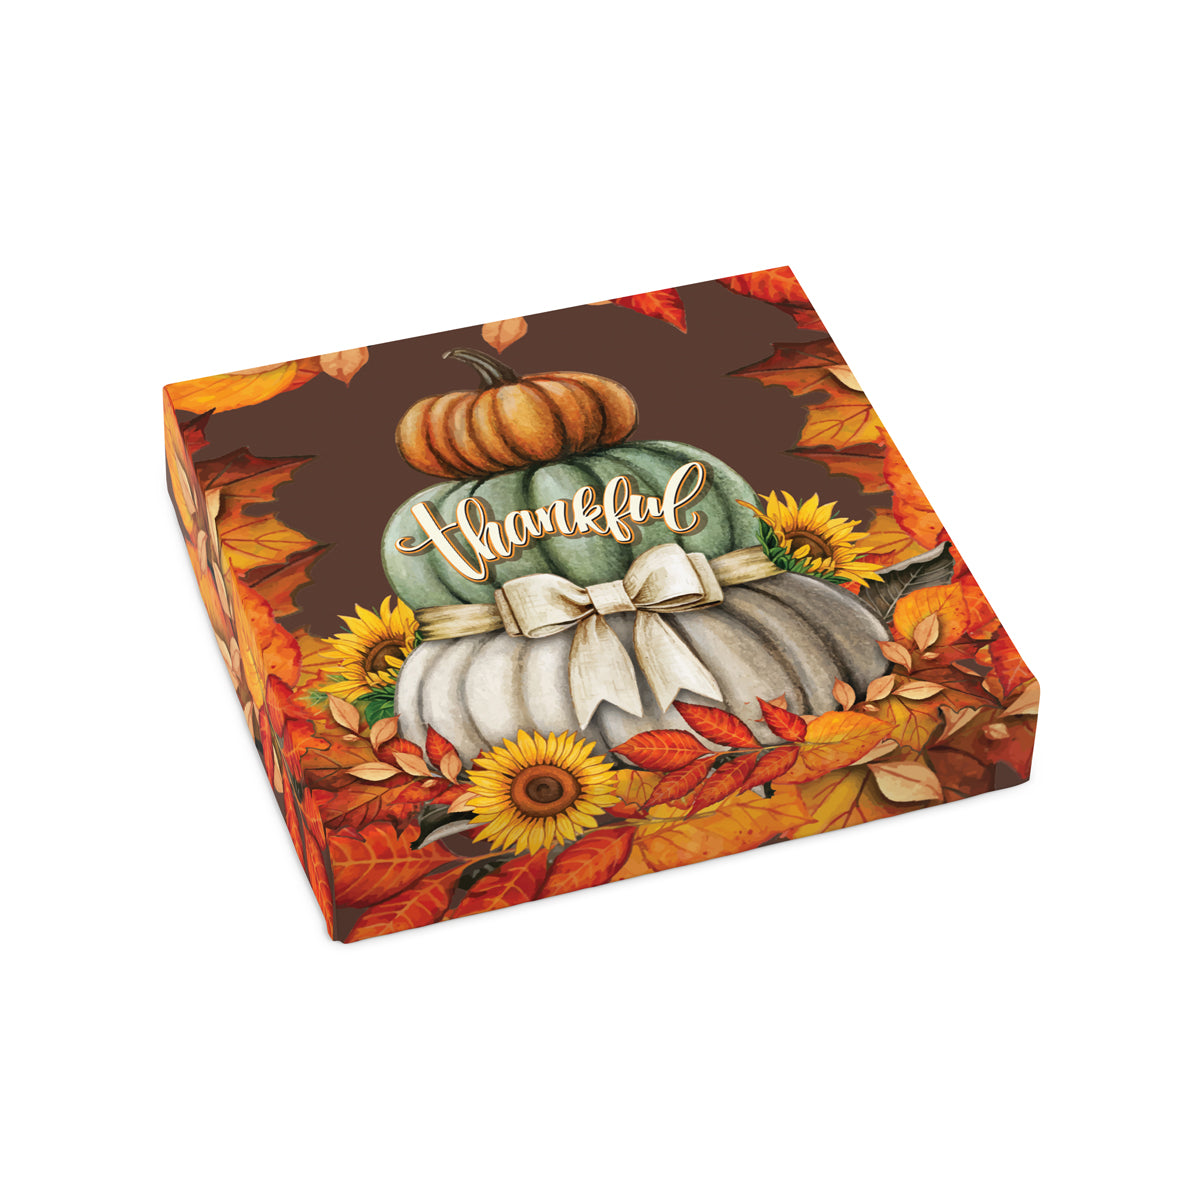 16 Piece Holiday Assortment: Fall, Halloween, and Thanksgiving